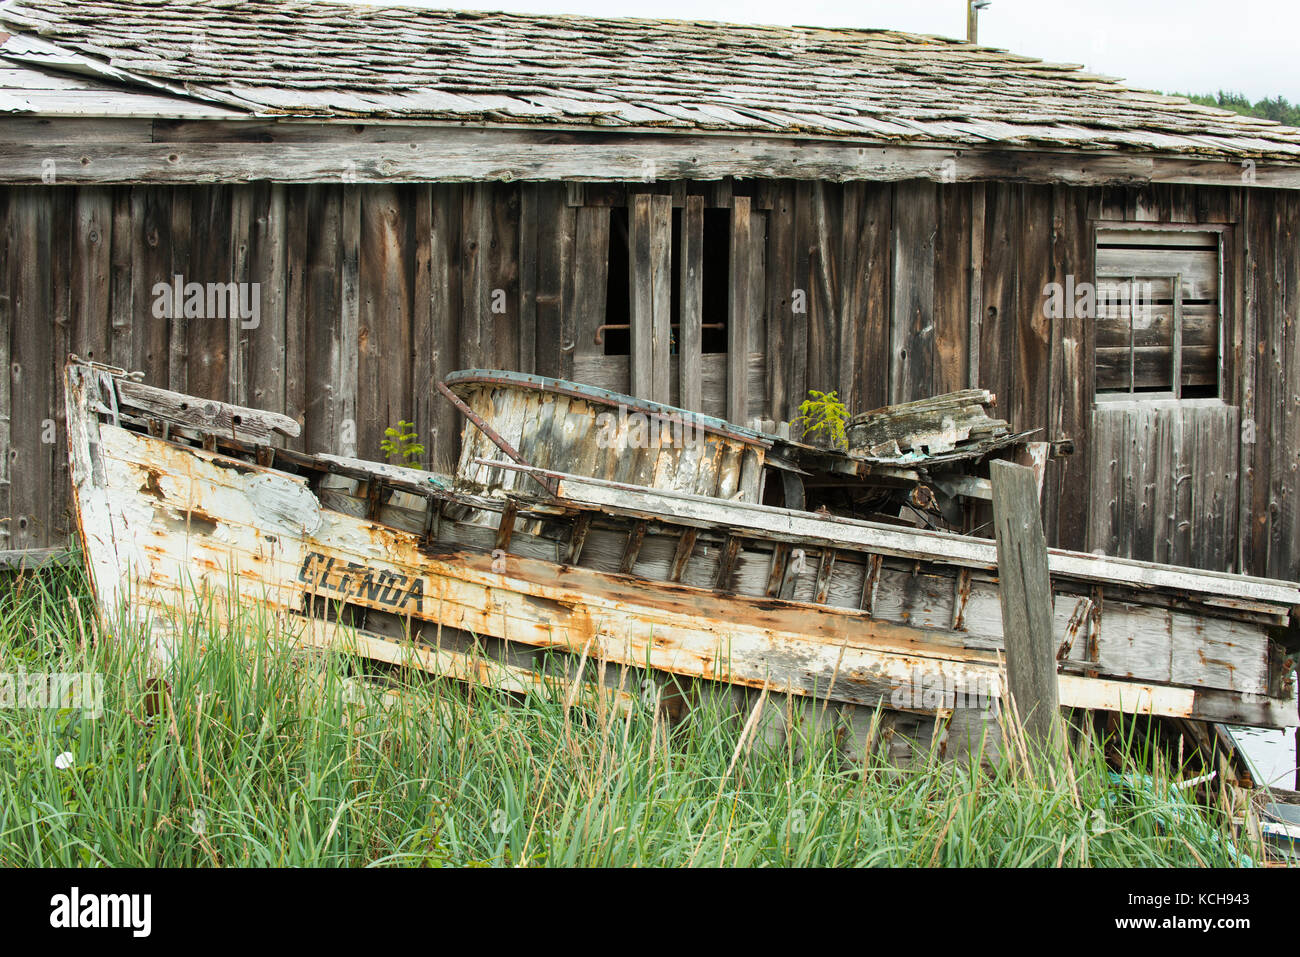 Old fishboat and gear shed, Alert Bay, Cormorant Island, Vancouver Island, British Columbia, Canada Stock Photo